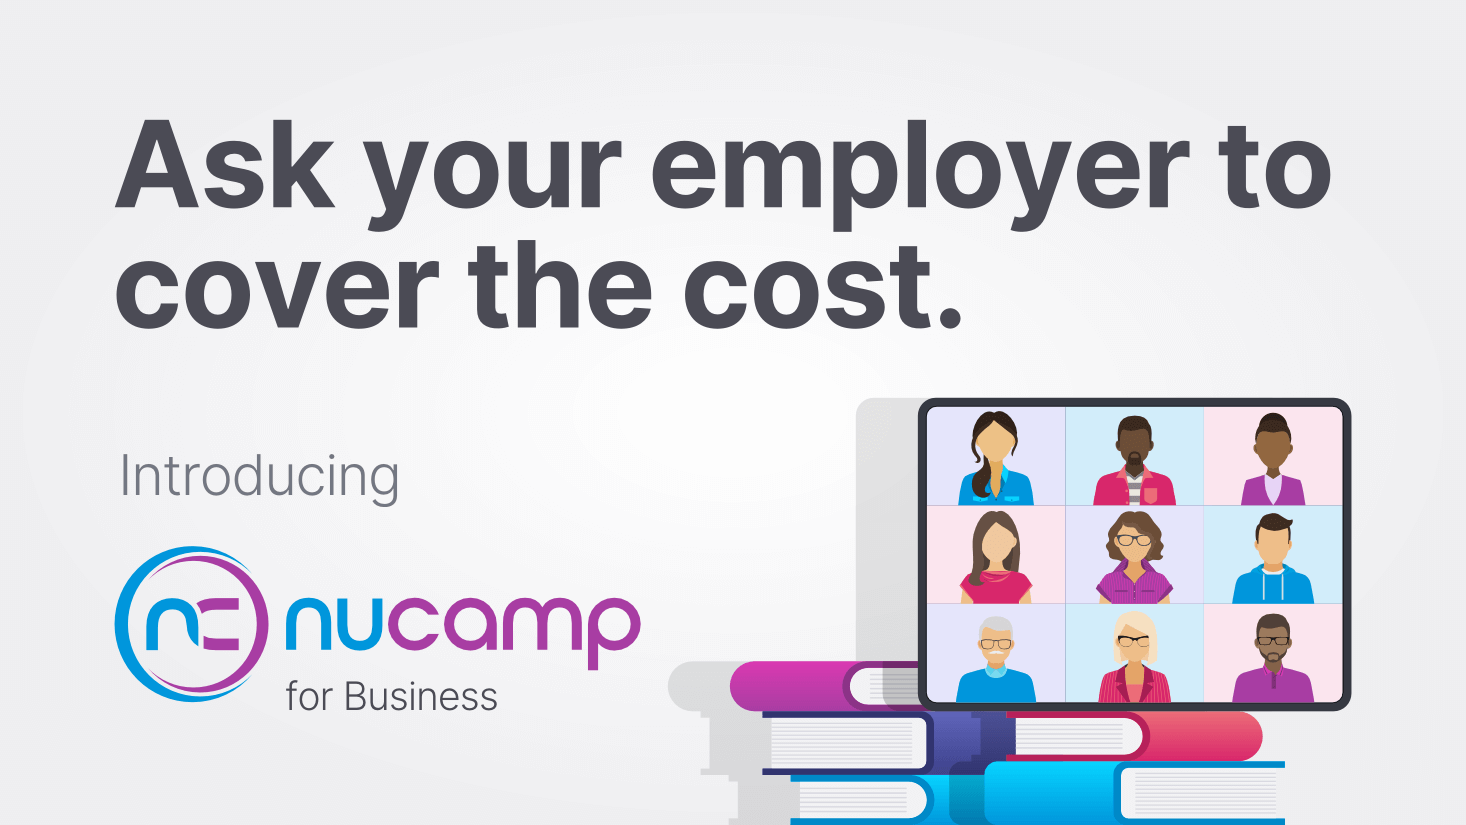 Ask your employer to invest in your professional development and corporate training.